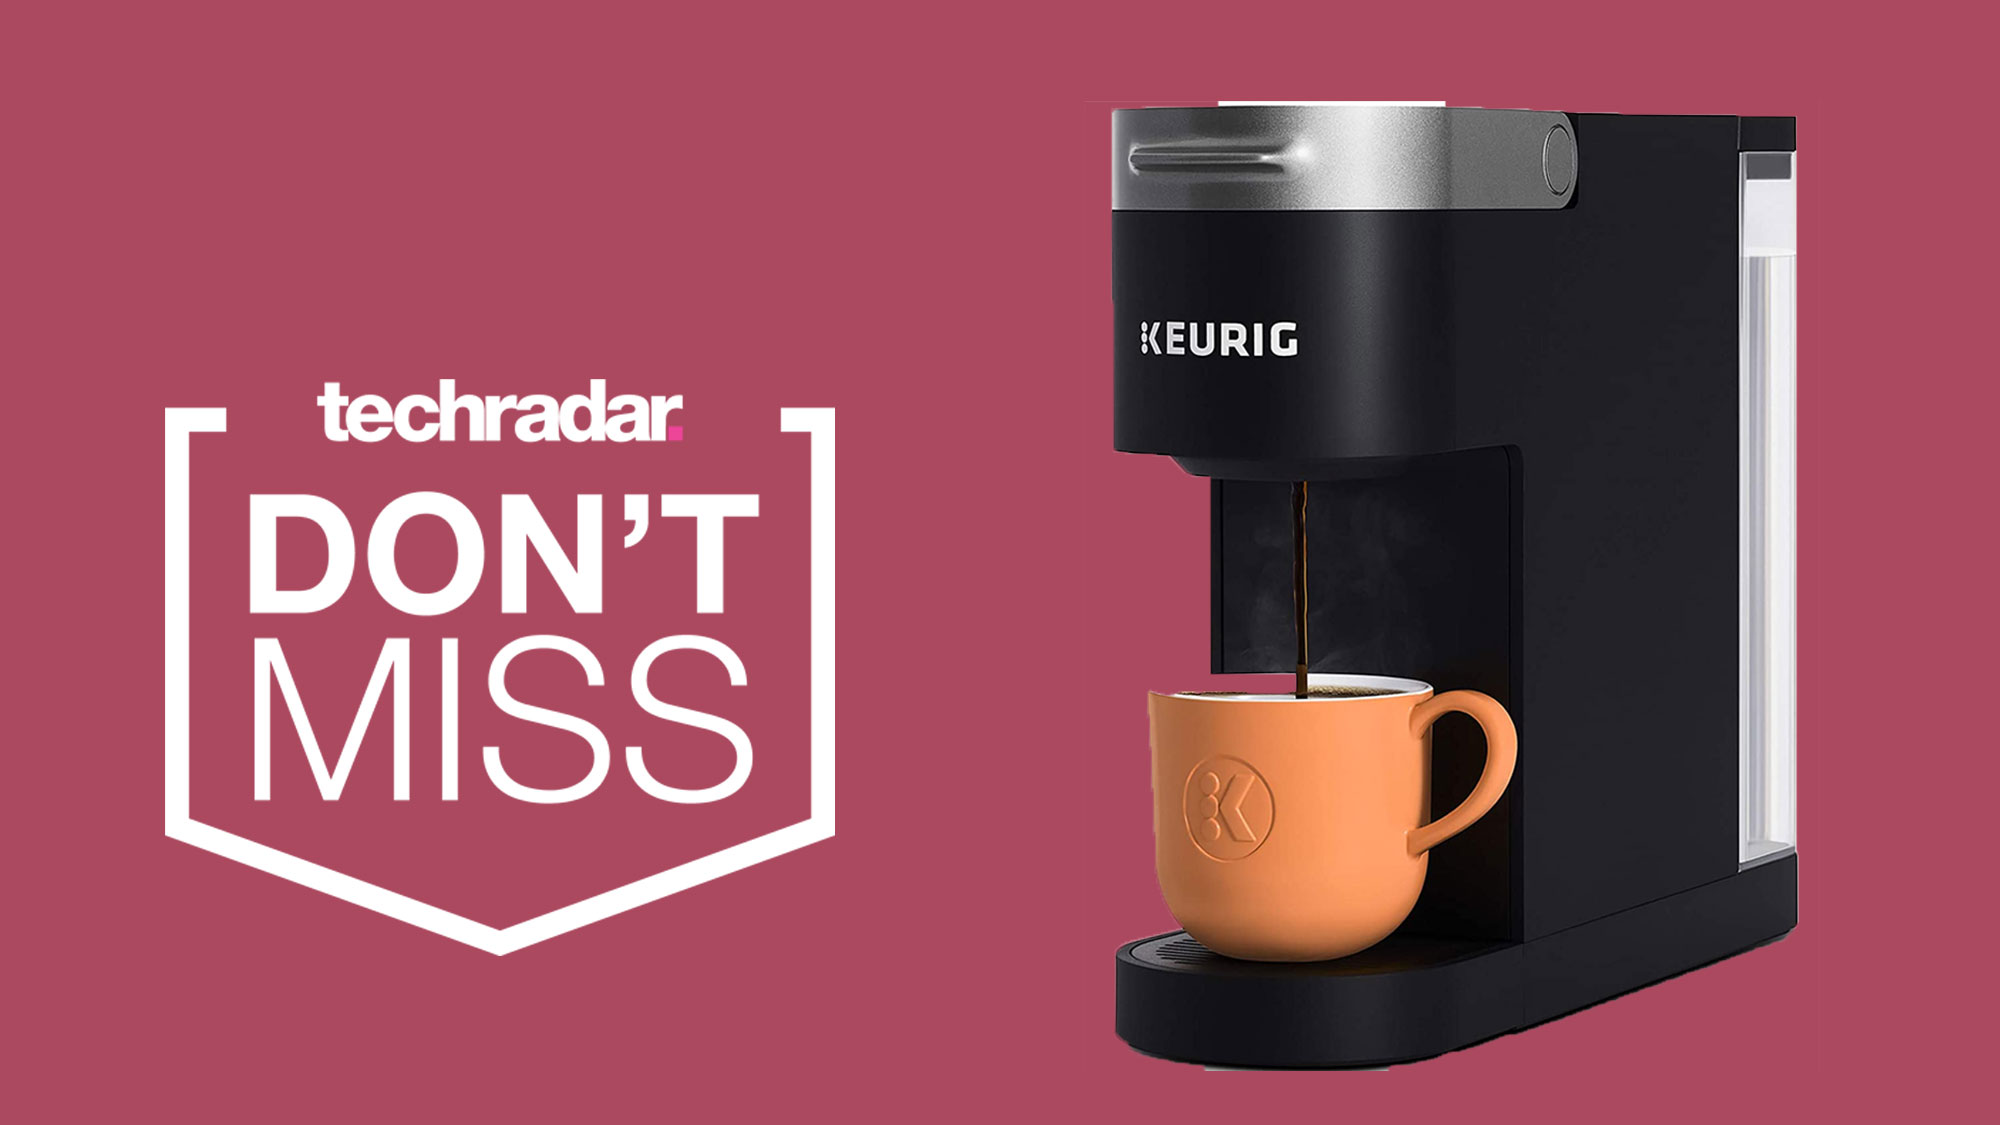 Prime Day espresso machine deals: Keurig, Nespresso, and Krups are all on sale now